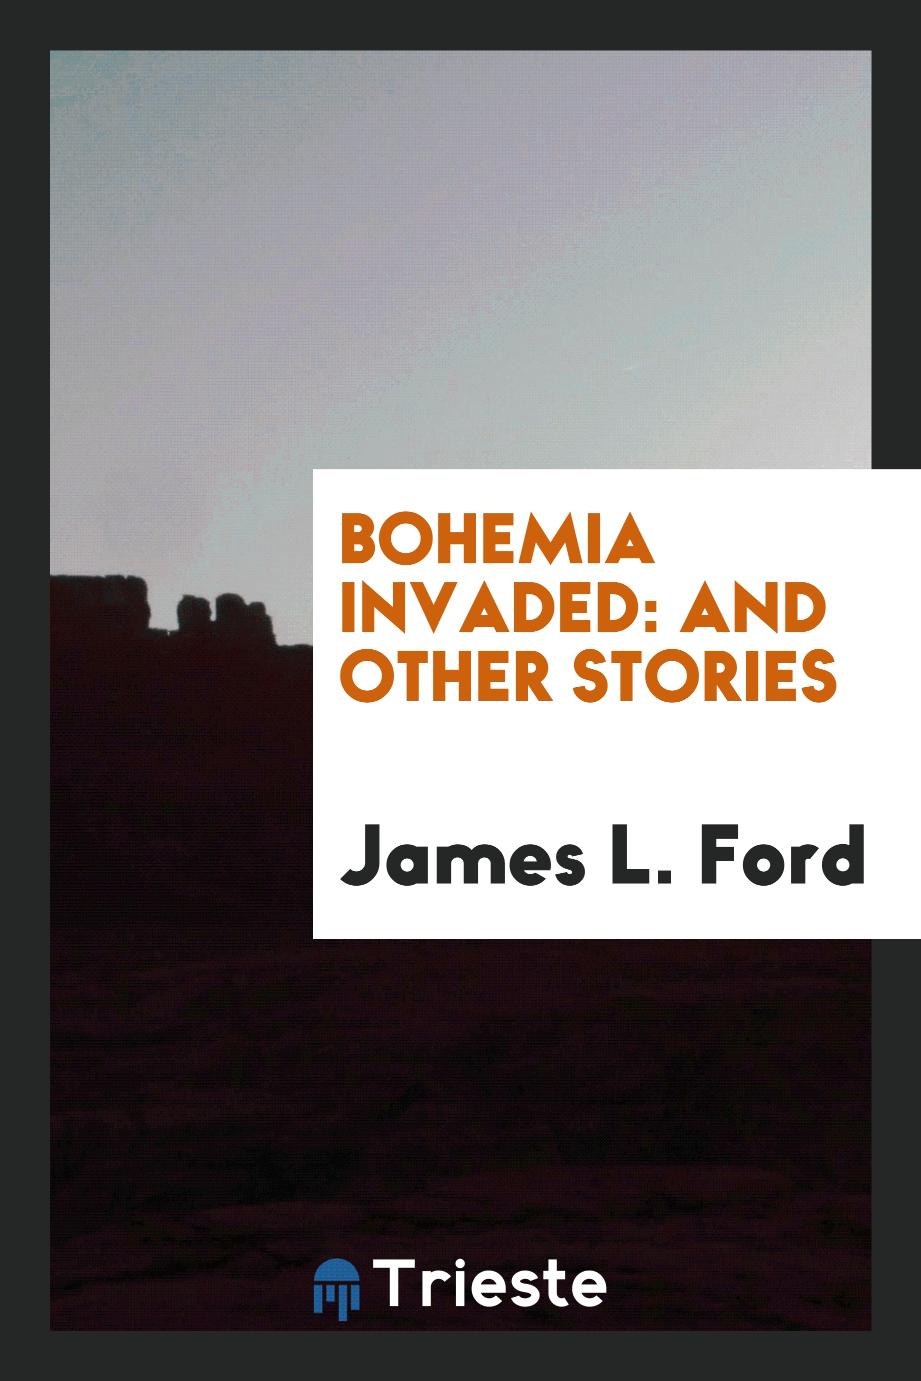 Bohemia invaded: and other stories